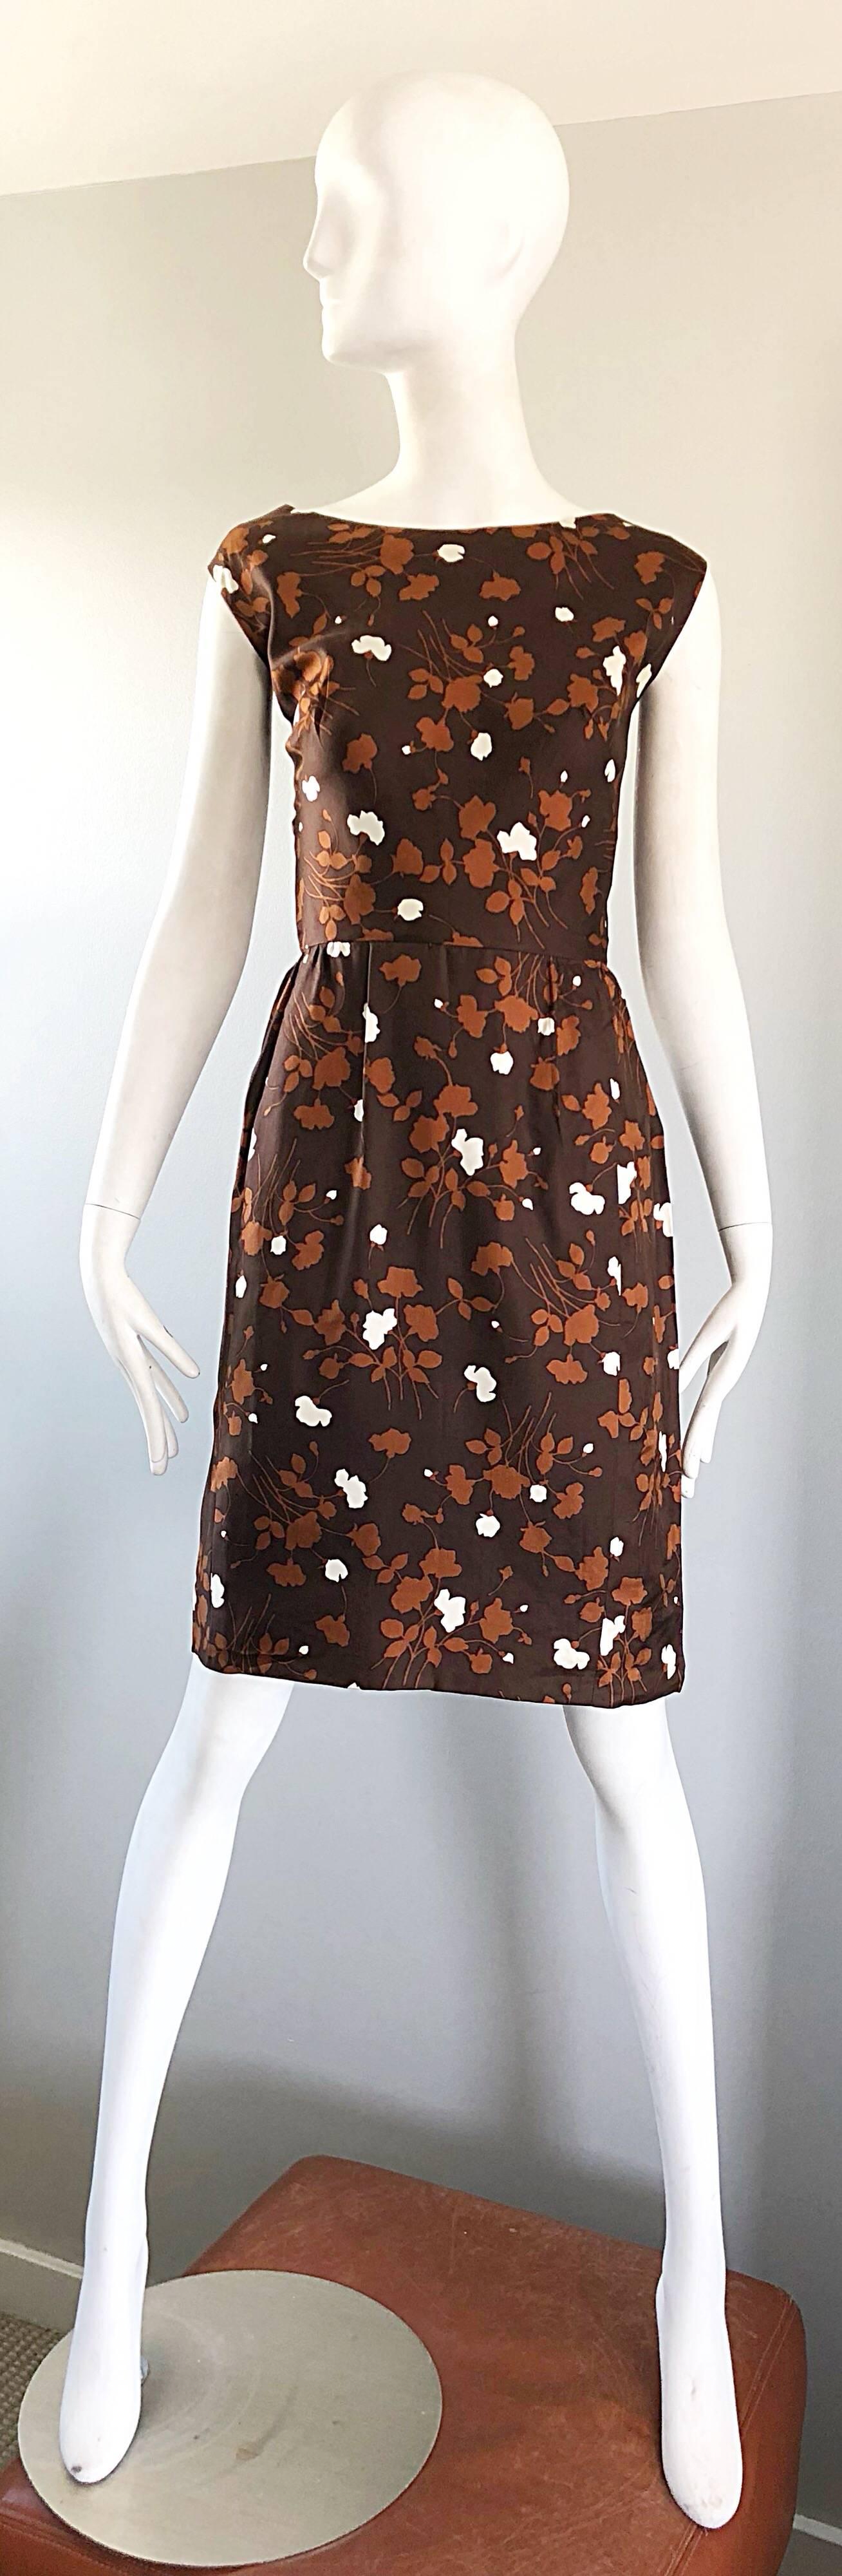 Chic 1960s brown, rust and white silk autumnal dress and jacket ensemble! Dress features a fitted bodice with a forgiving skirt. Full metal zipper up the back with button closure. POCKETS at both sides of the hips. Jacket is a faux double breasted